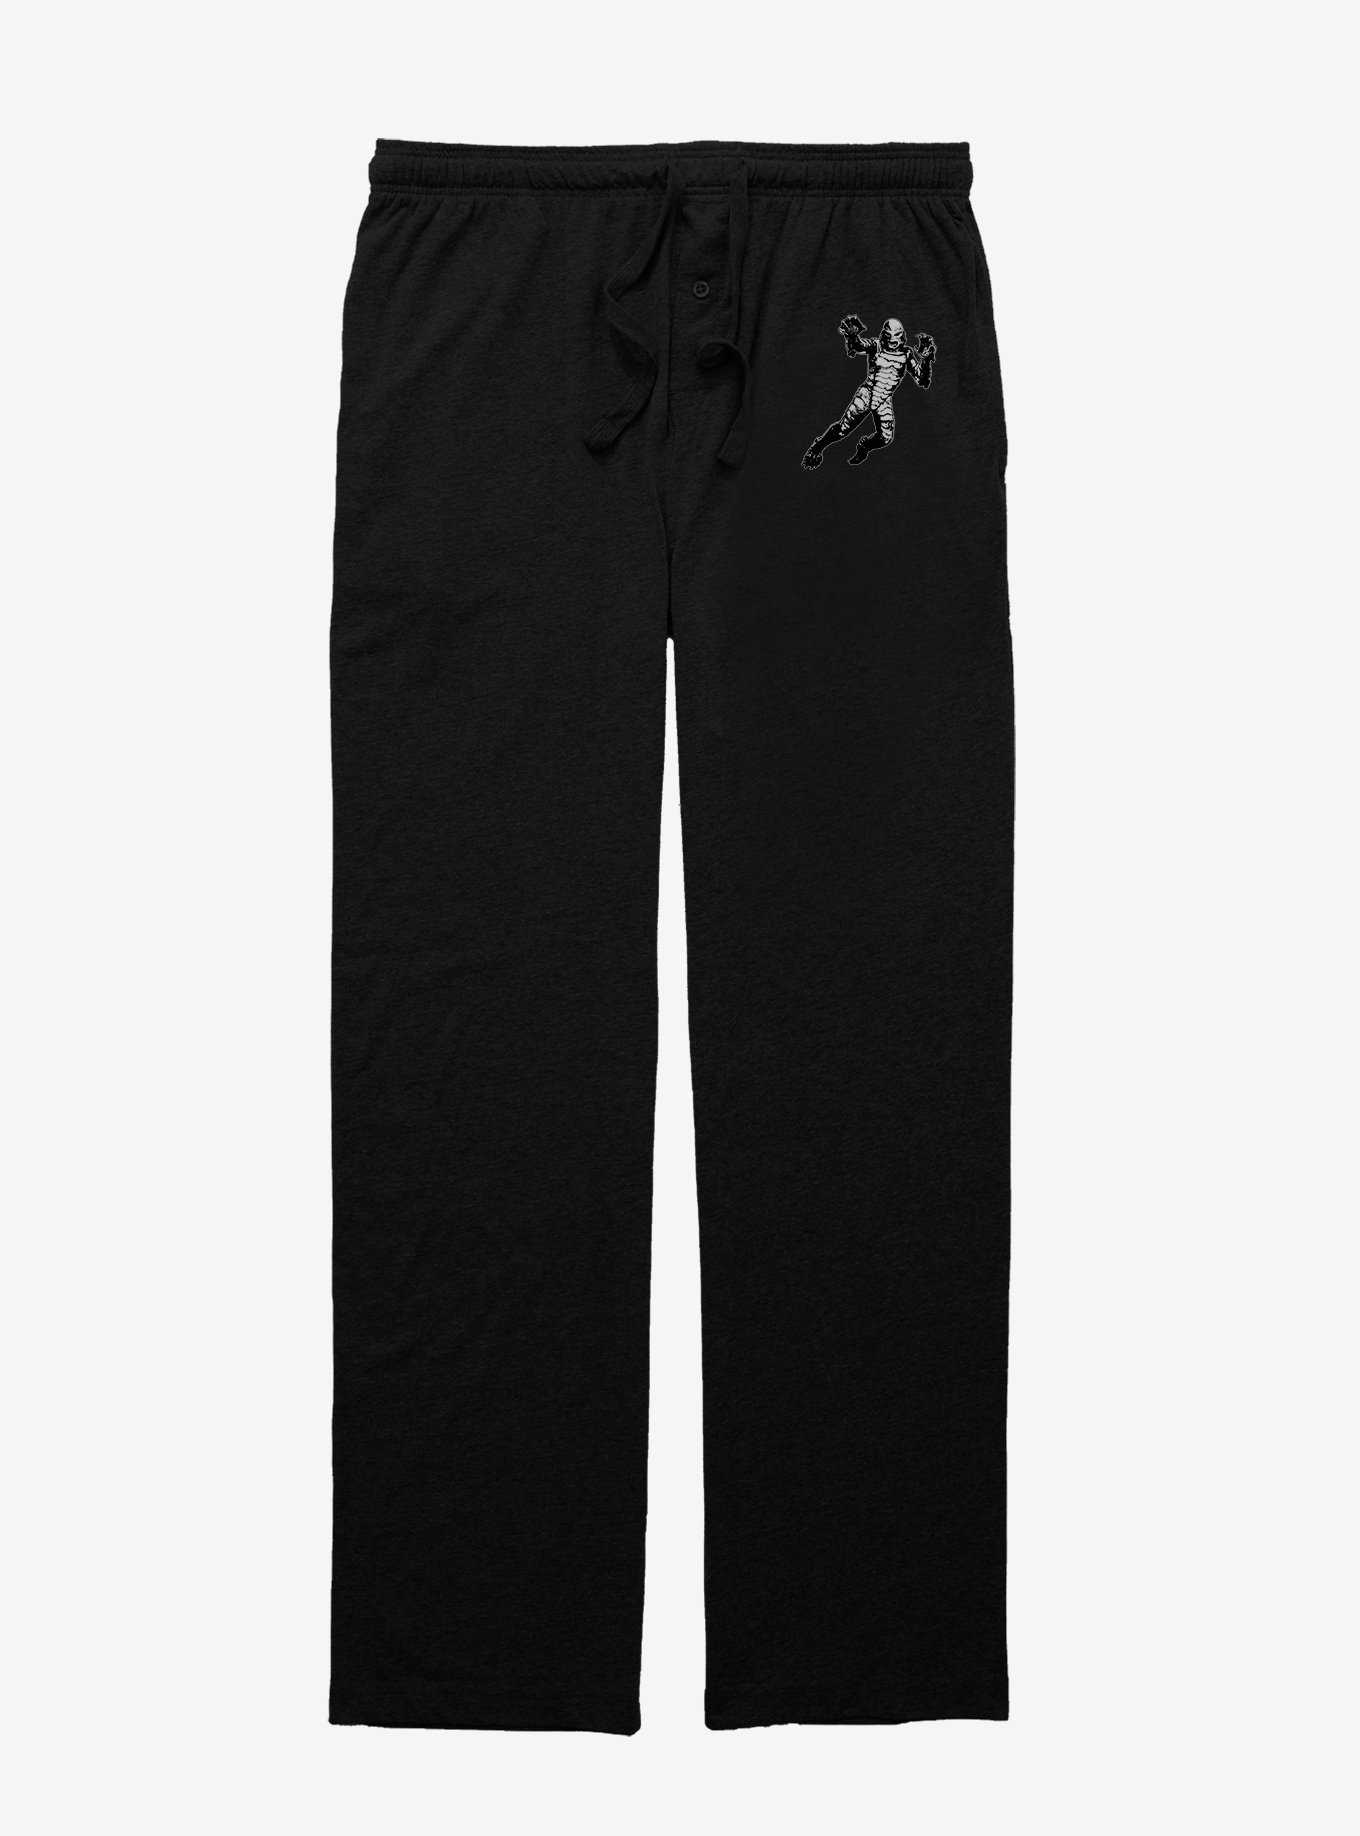 Creature From The Black Lagoon Horror Stance Pajama Pants, , hi-res